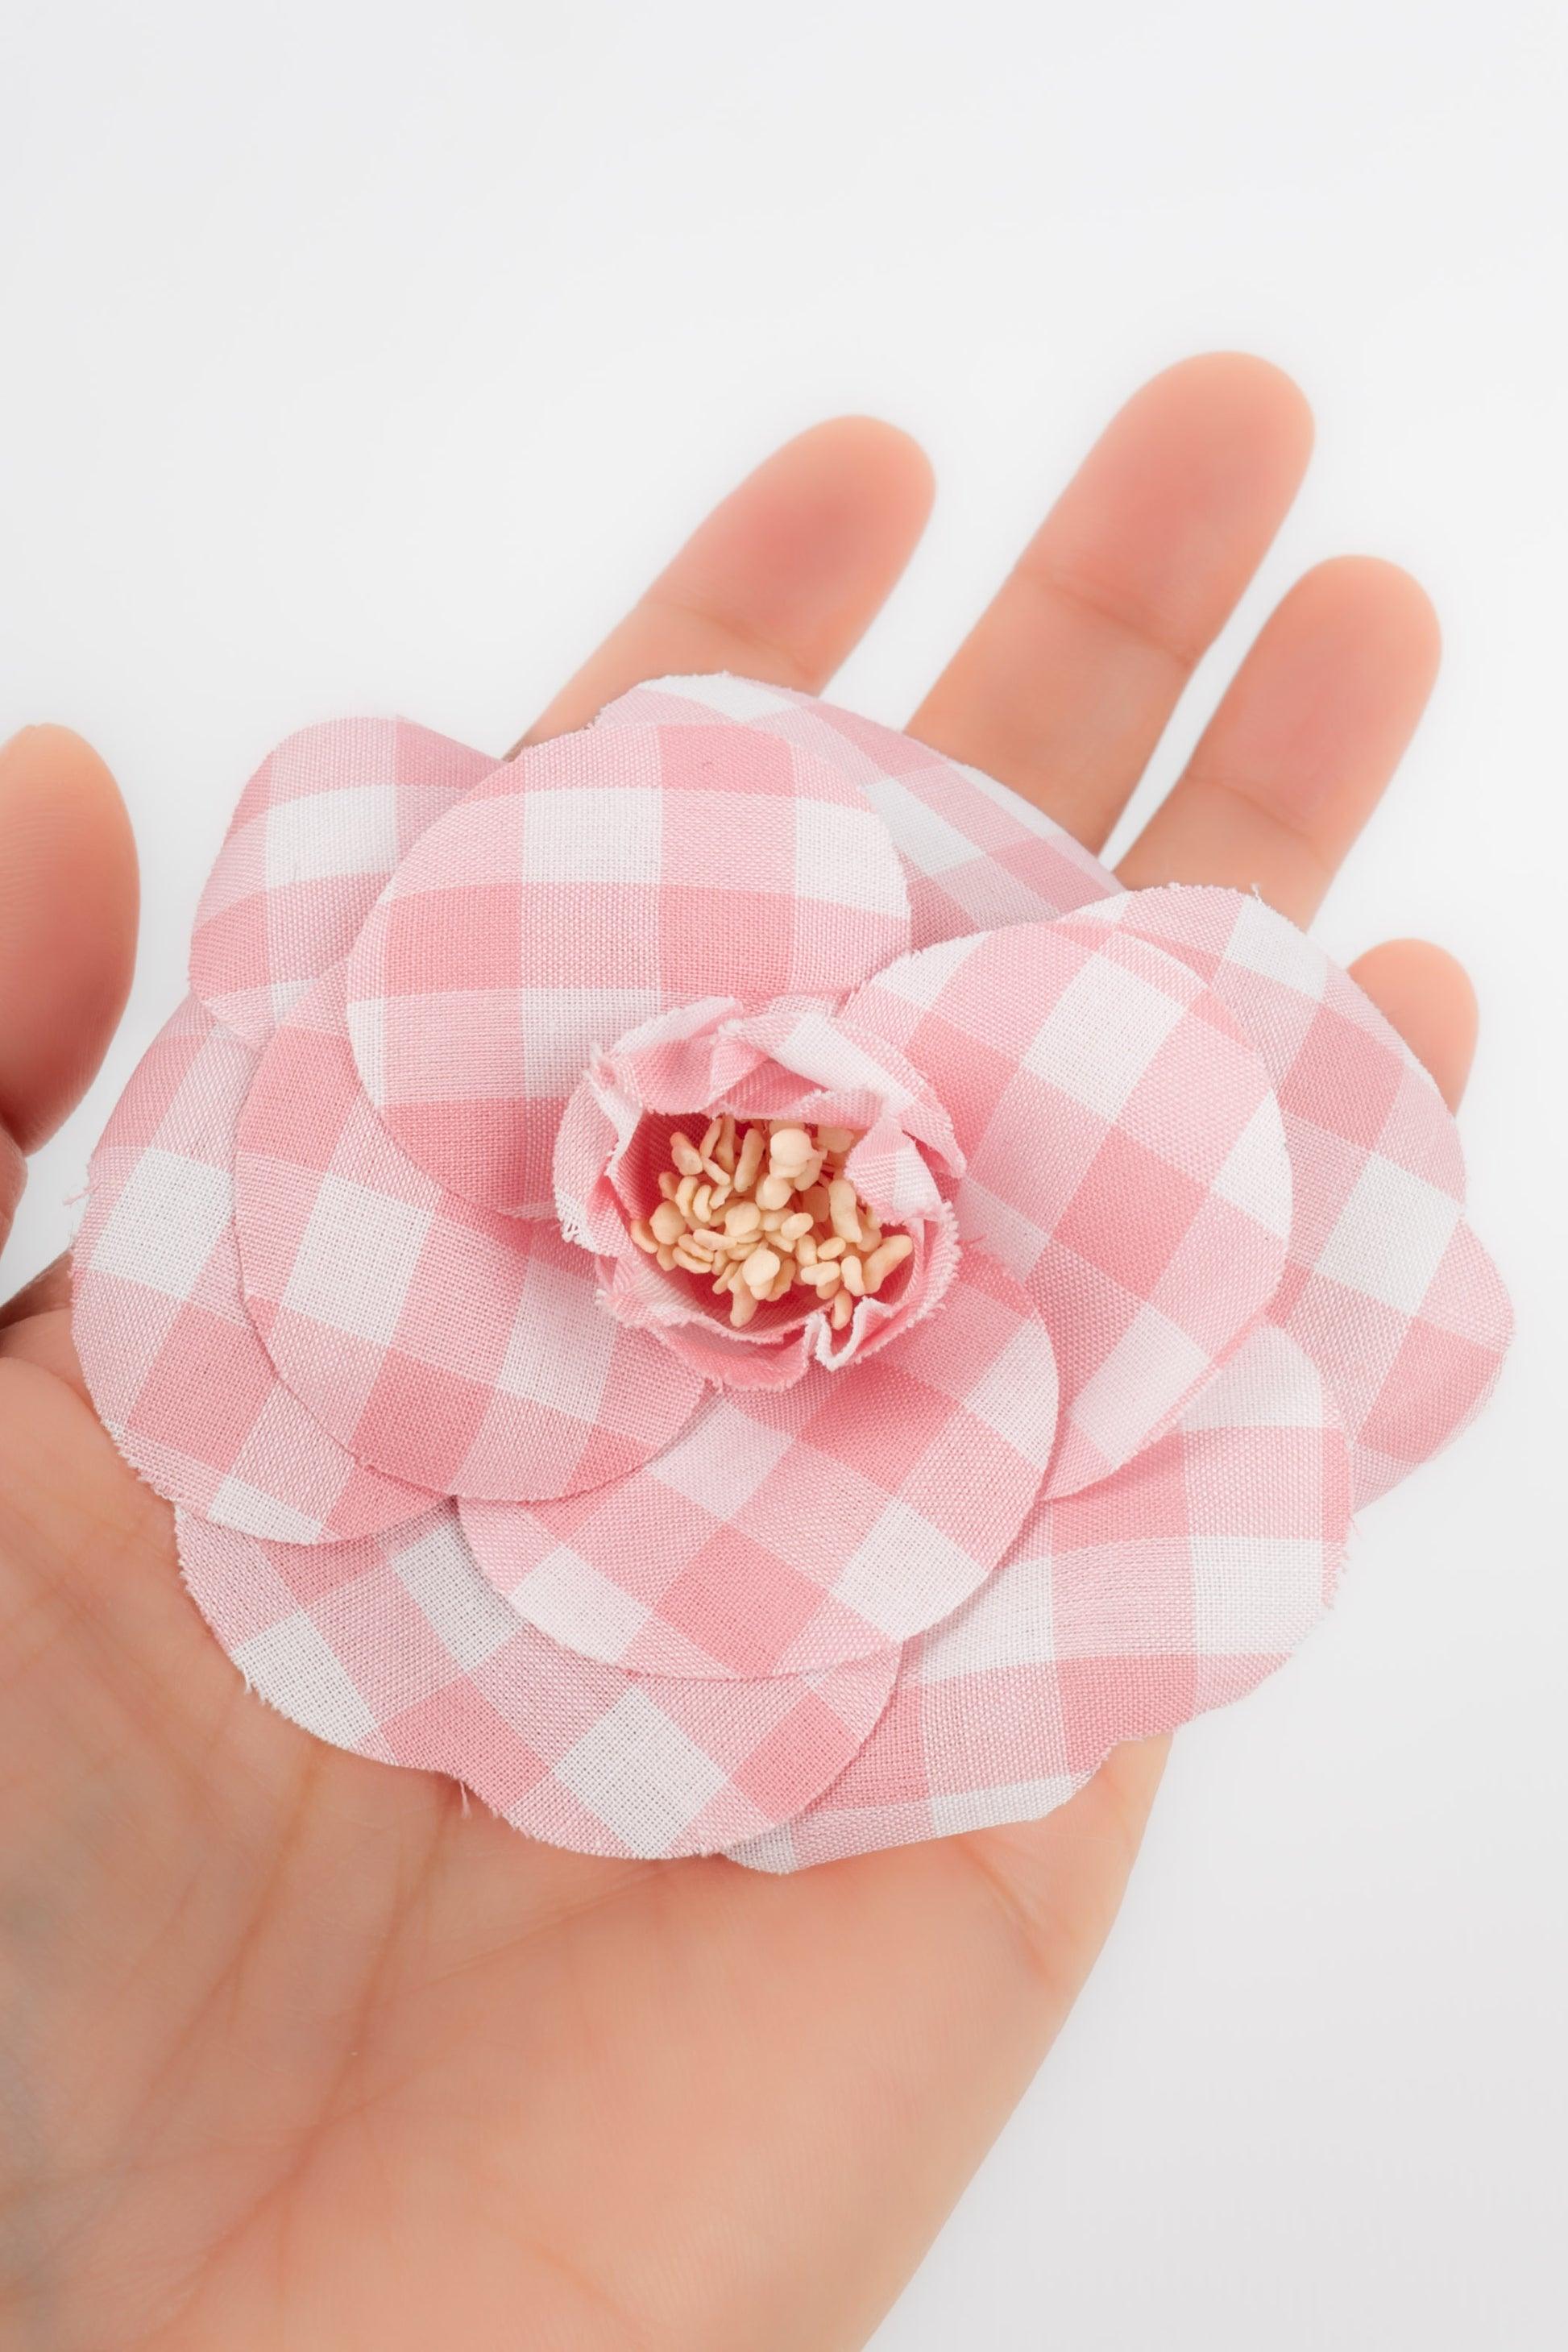 Chanel Brooch Camellia Made of Pink and White Gingham Fabric, 1990s For Sale 2